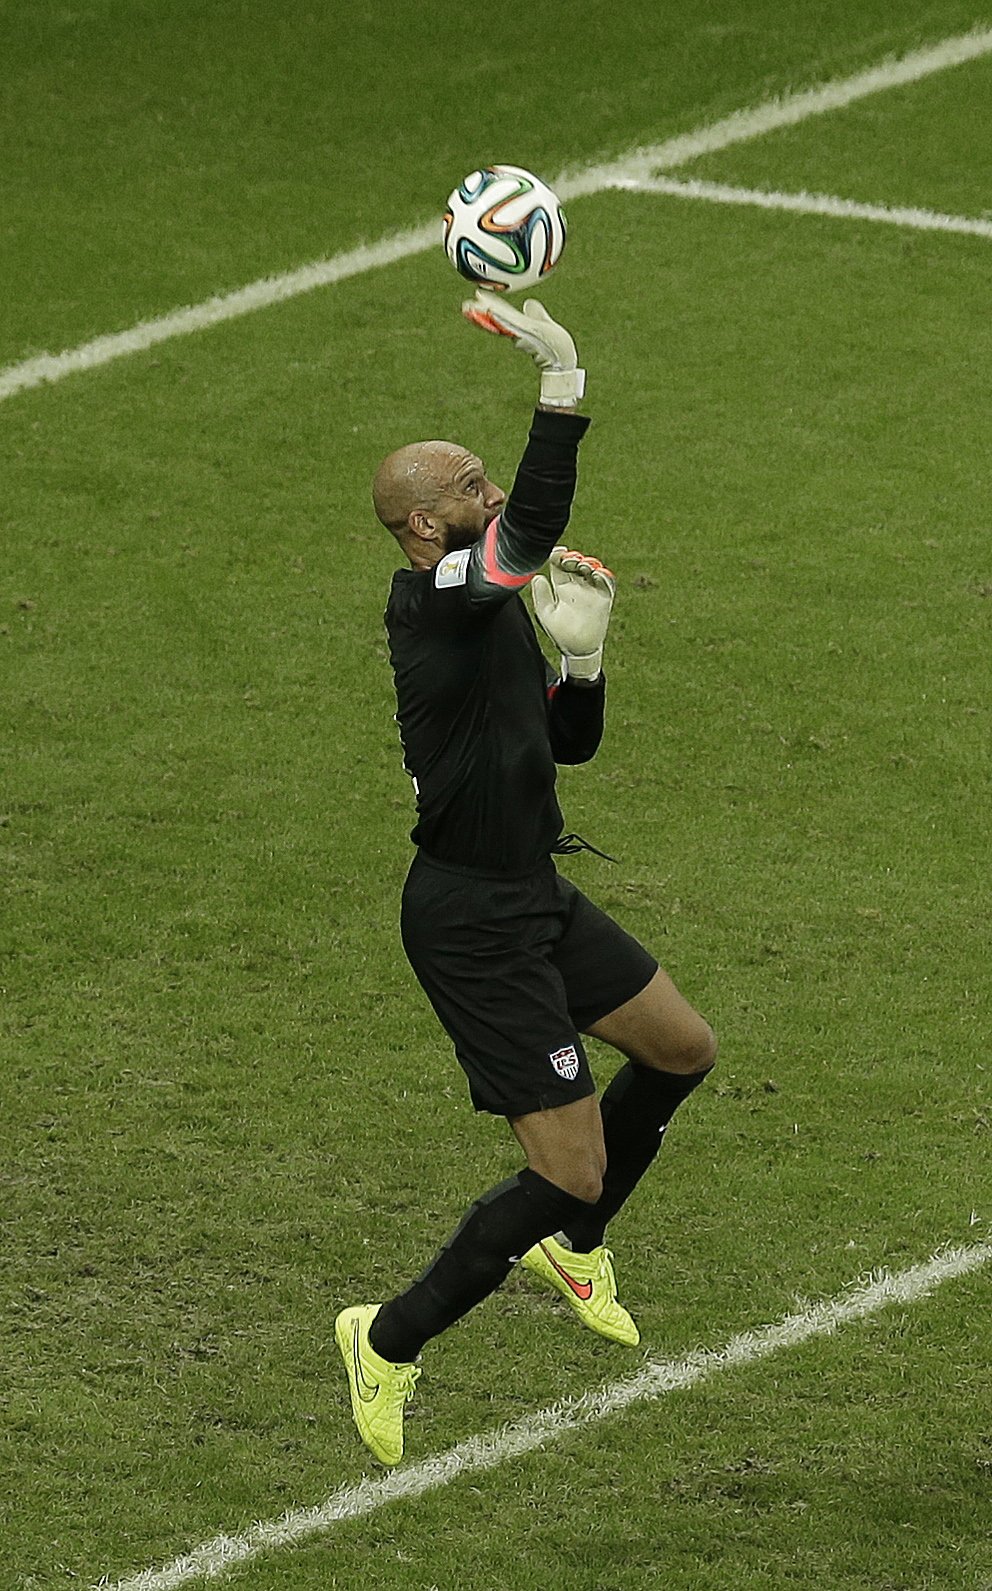 Tim Howard reacts during the FIFA World Cup 2014 round of 16 match between Belgium and the USA at the Arena Fonte Nova in Salvador, Brazil on July 1, 2014.